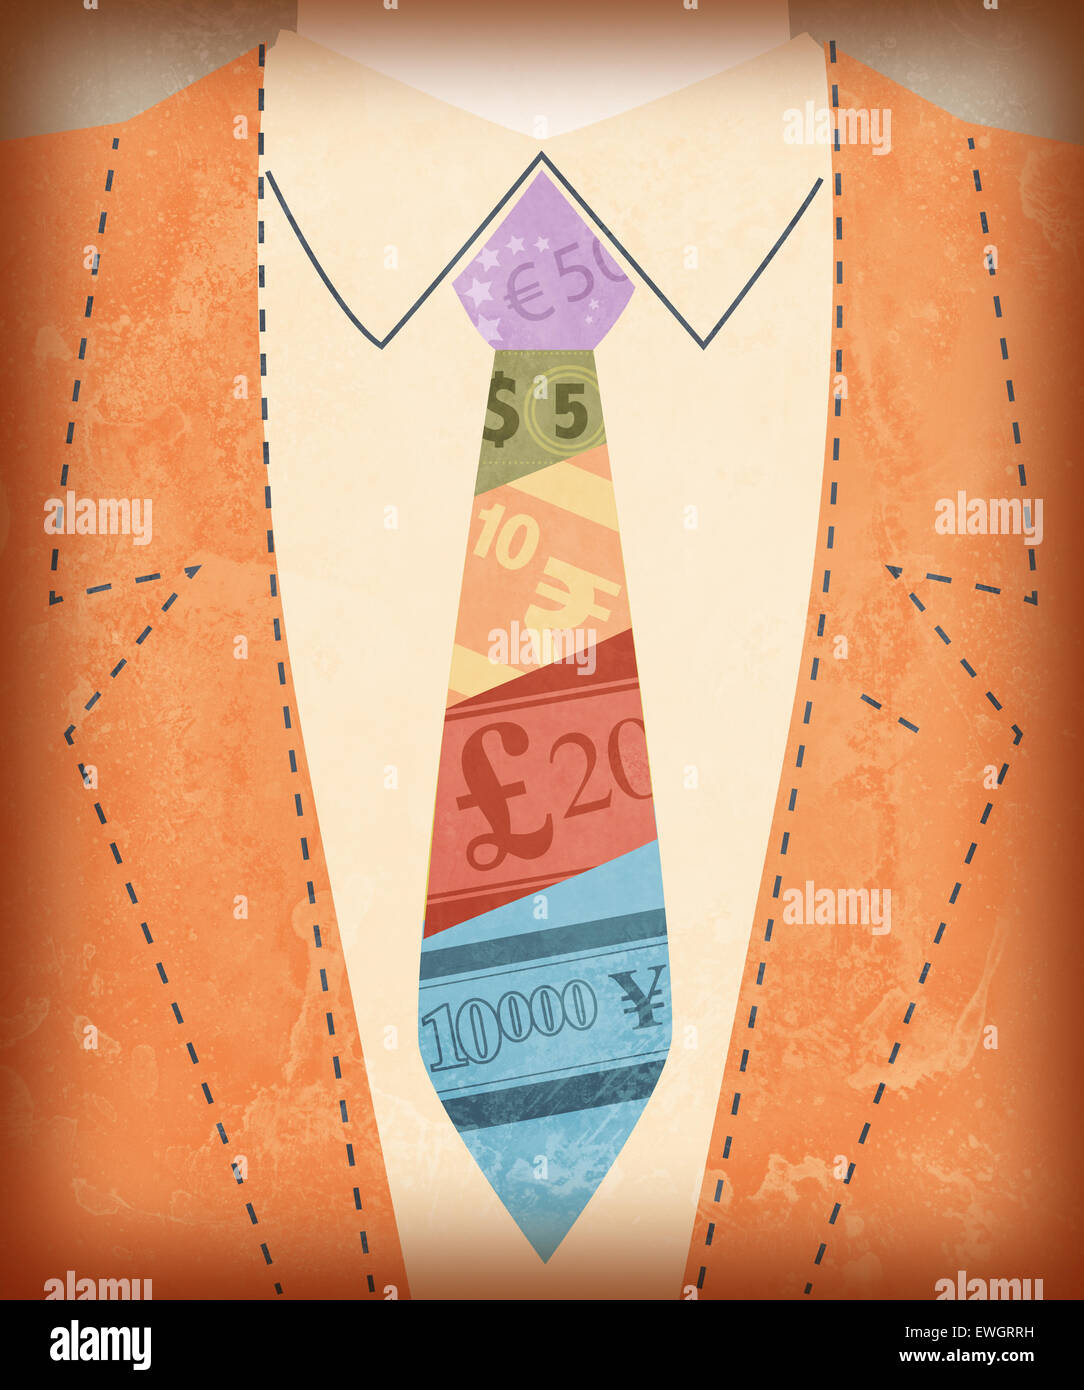 Midsection view of businessman with international currency symbols on tie Stock Photo